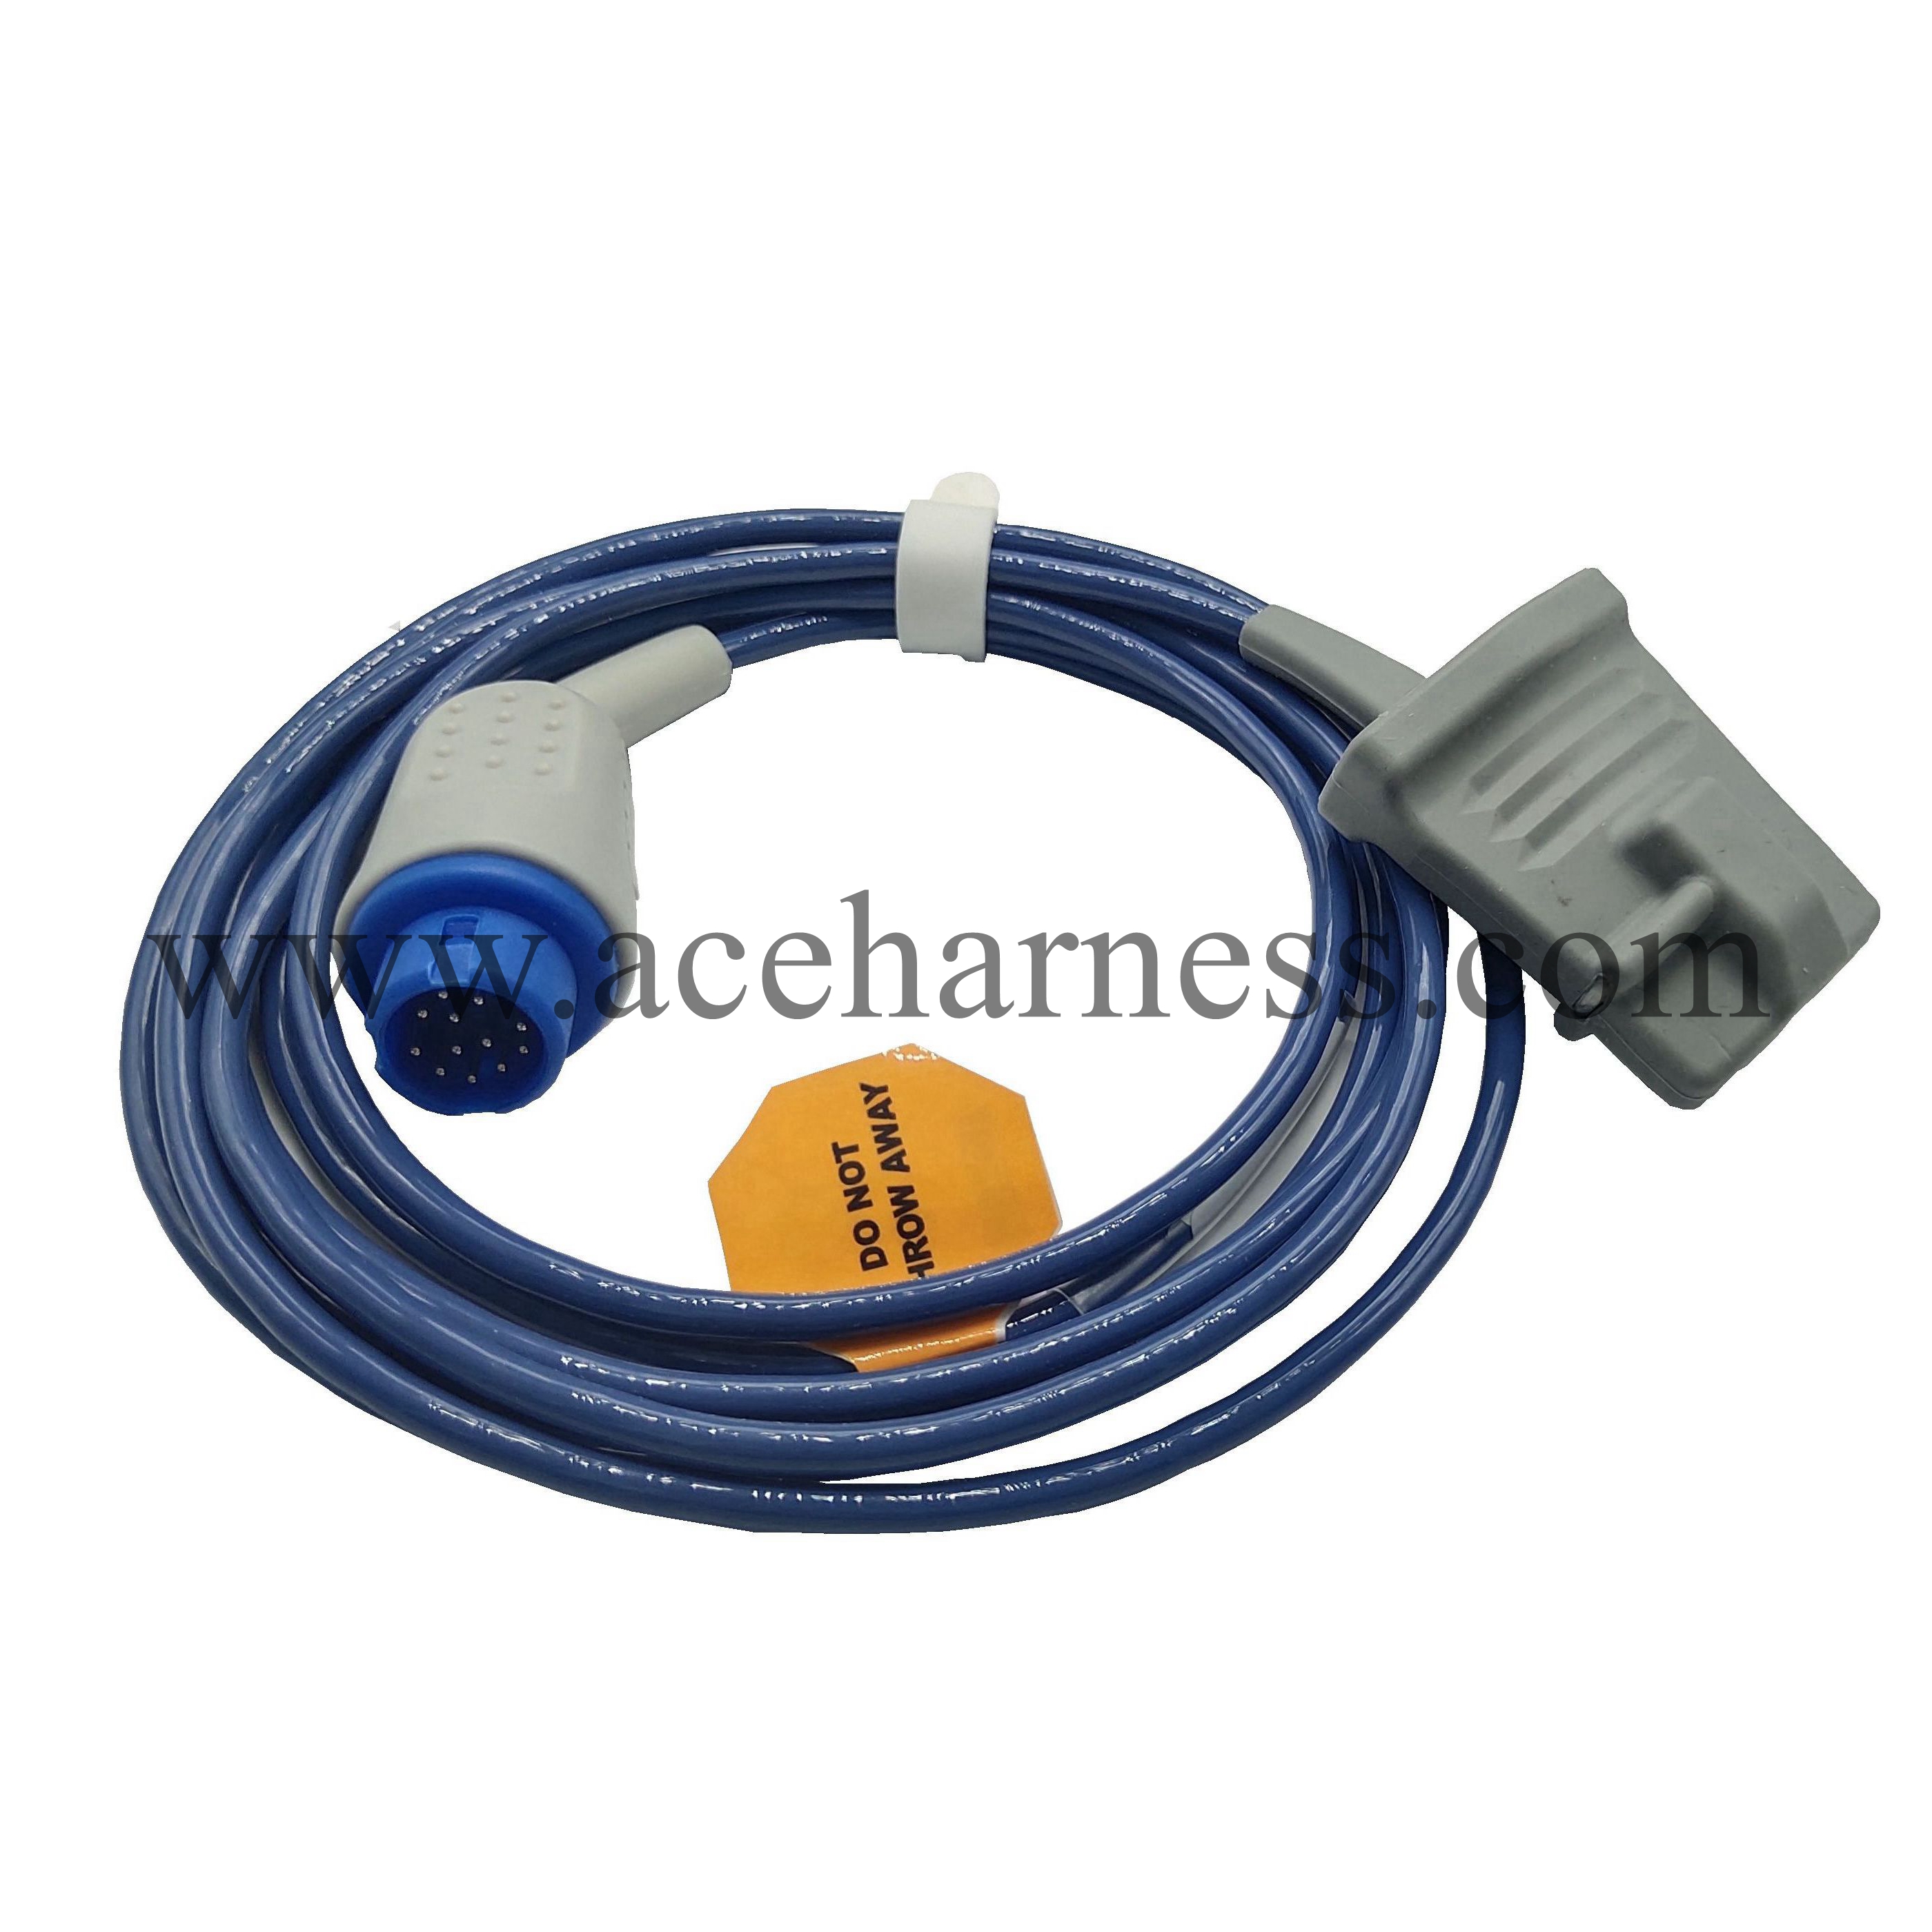 Nurse call cable assembly(ACE0201-42)